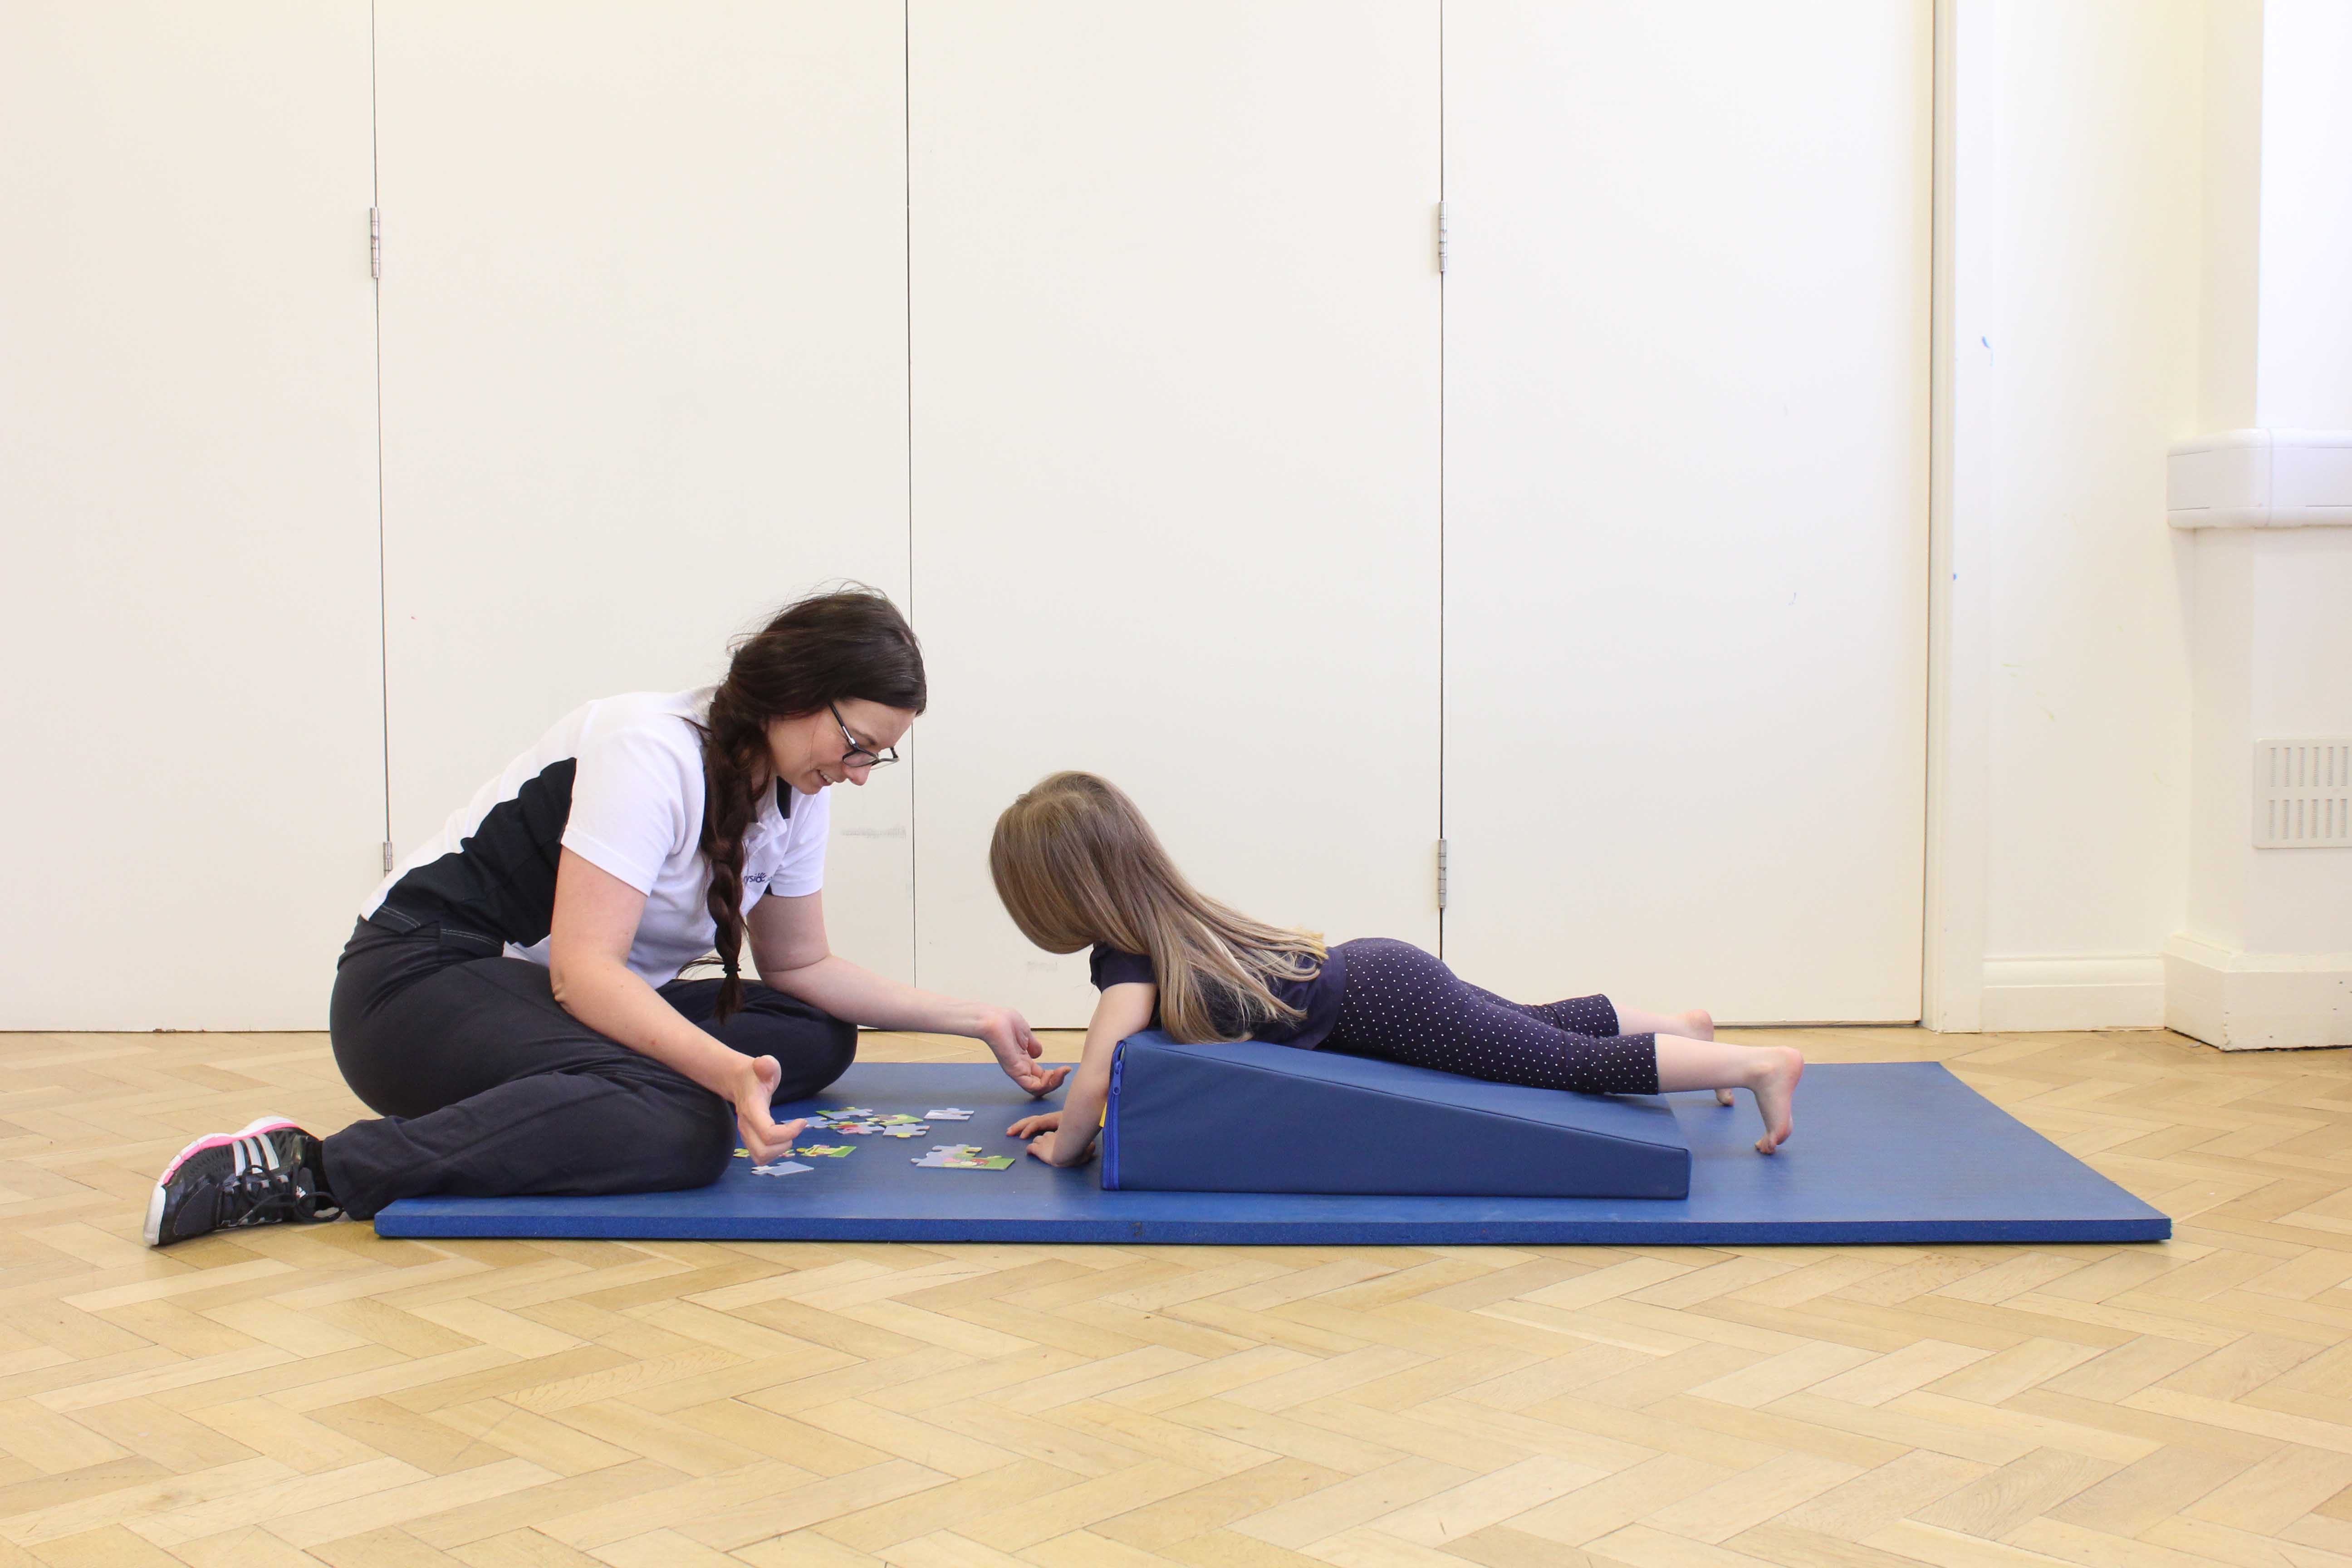 Upper limb mobility exercises through play activities supervised by a neurological physiotherapist